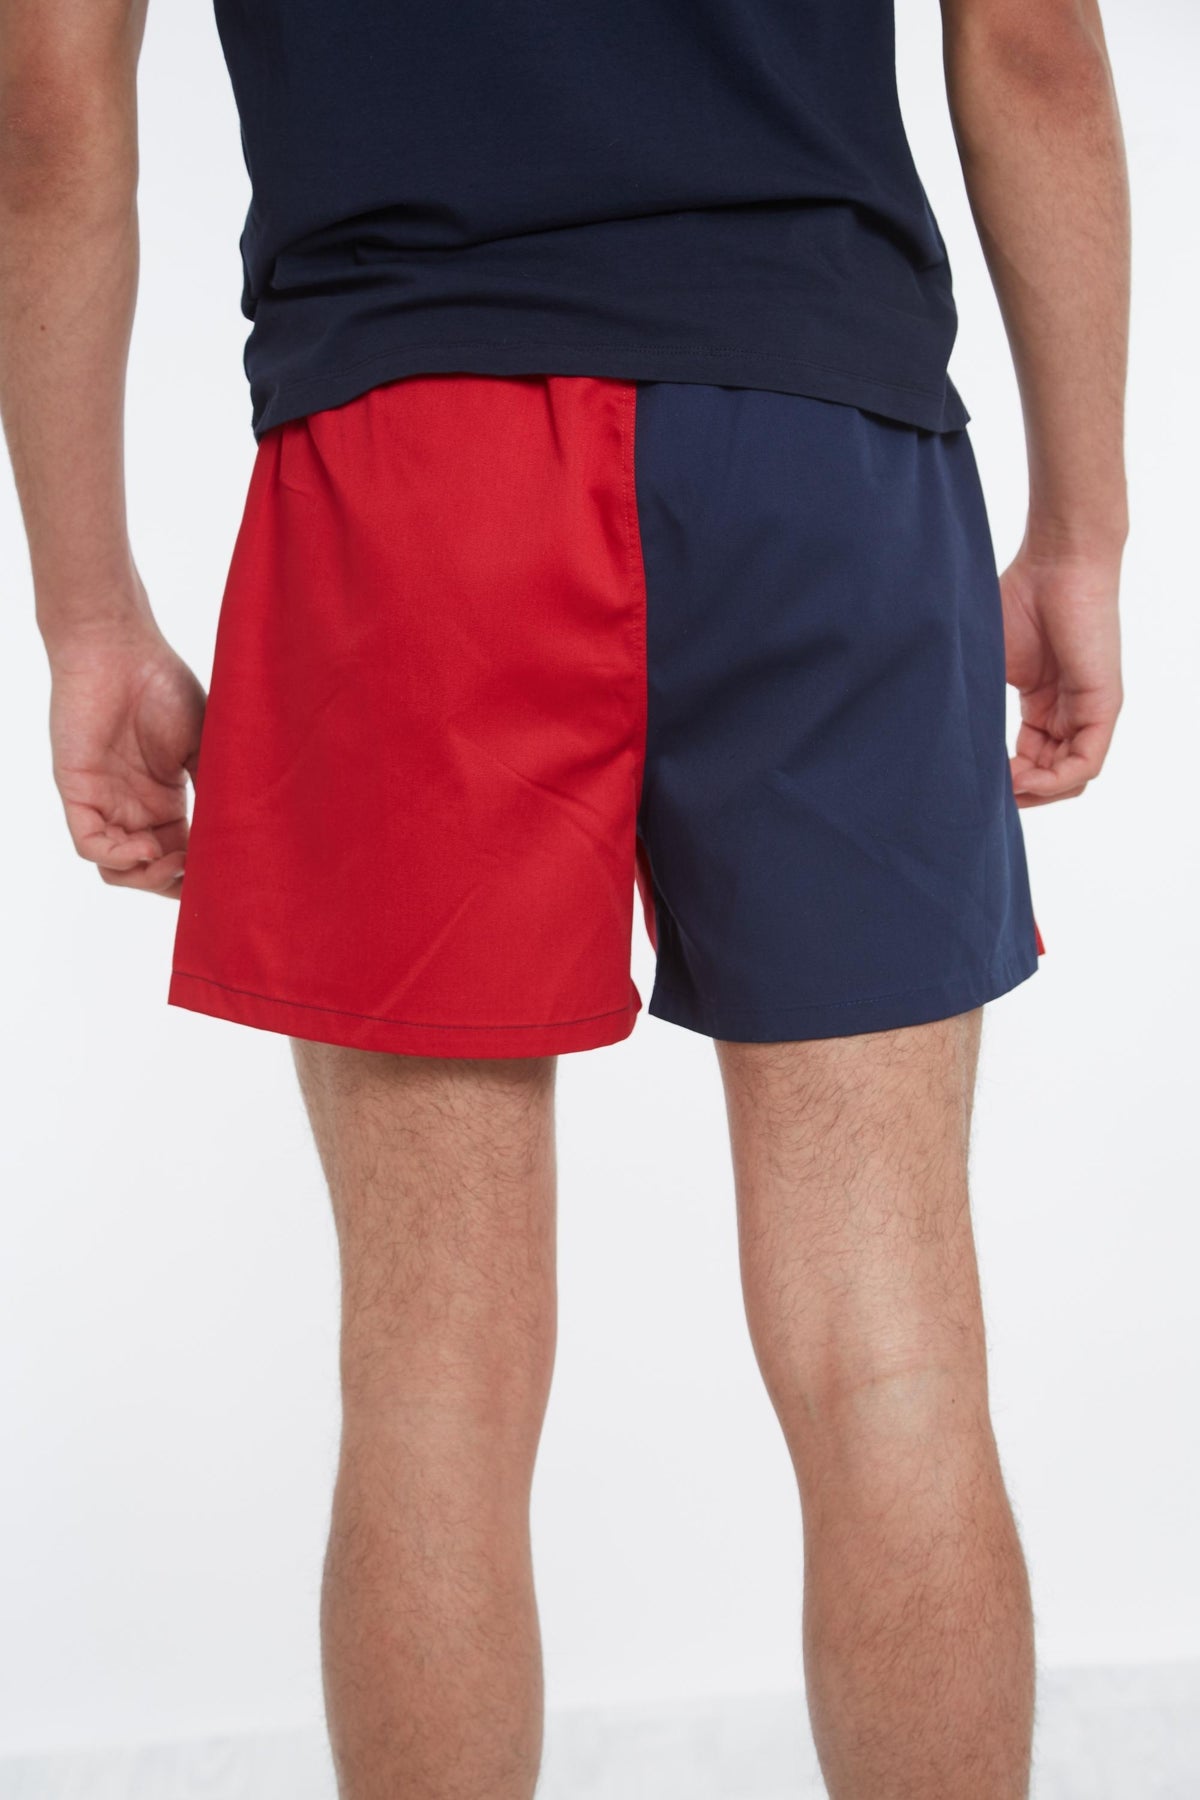 Rugby Shorts - Red - Whale Of A Time Clothing